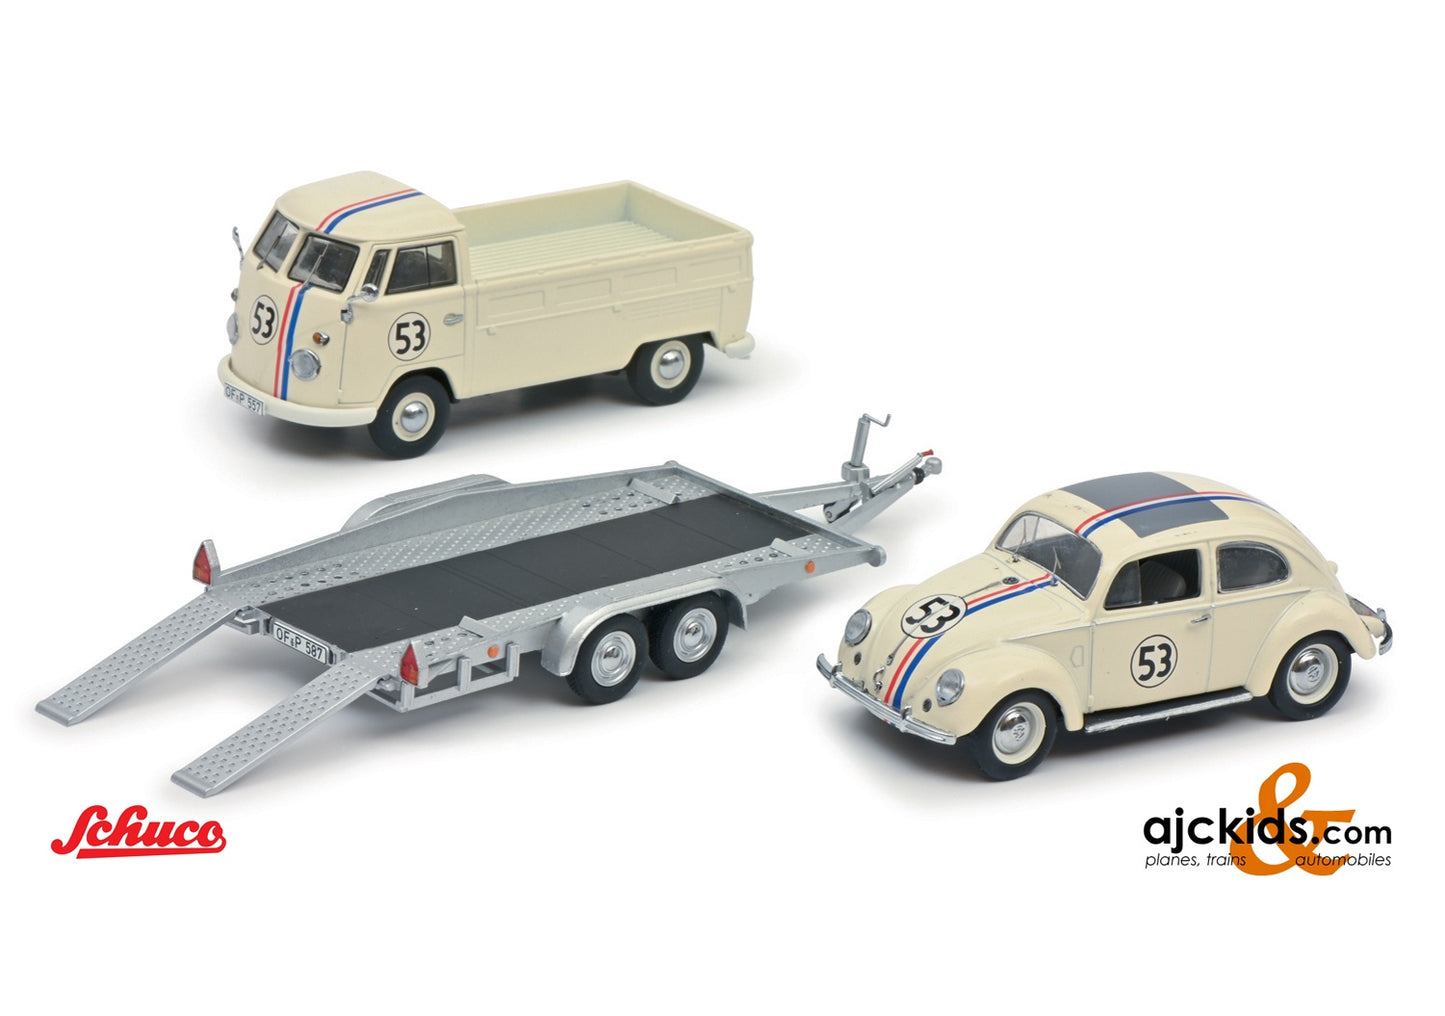 Schuco 450275800 - VW T1b with trailer VW Beetle #53 1:43